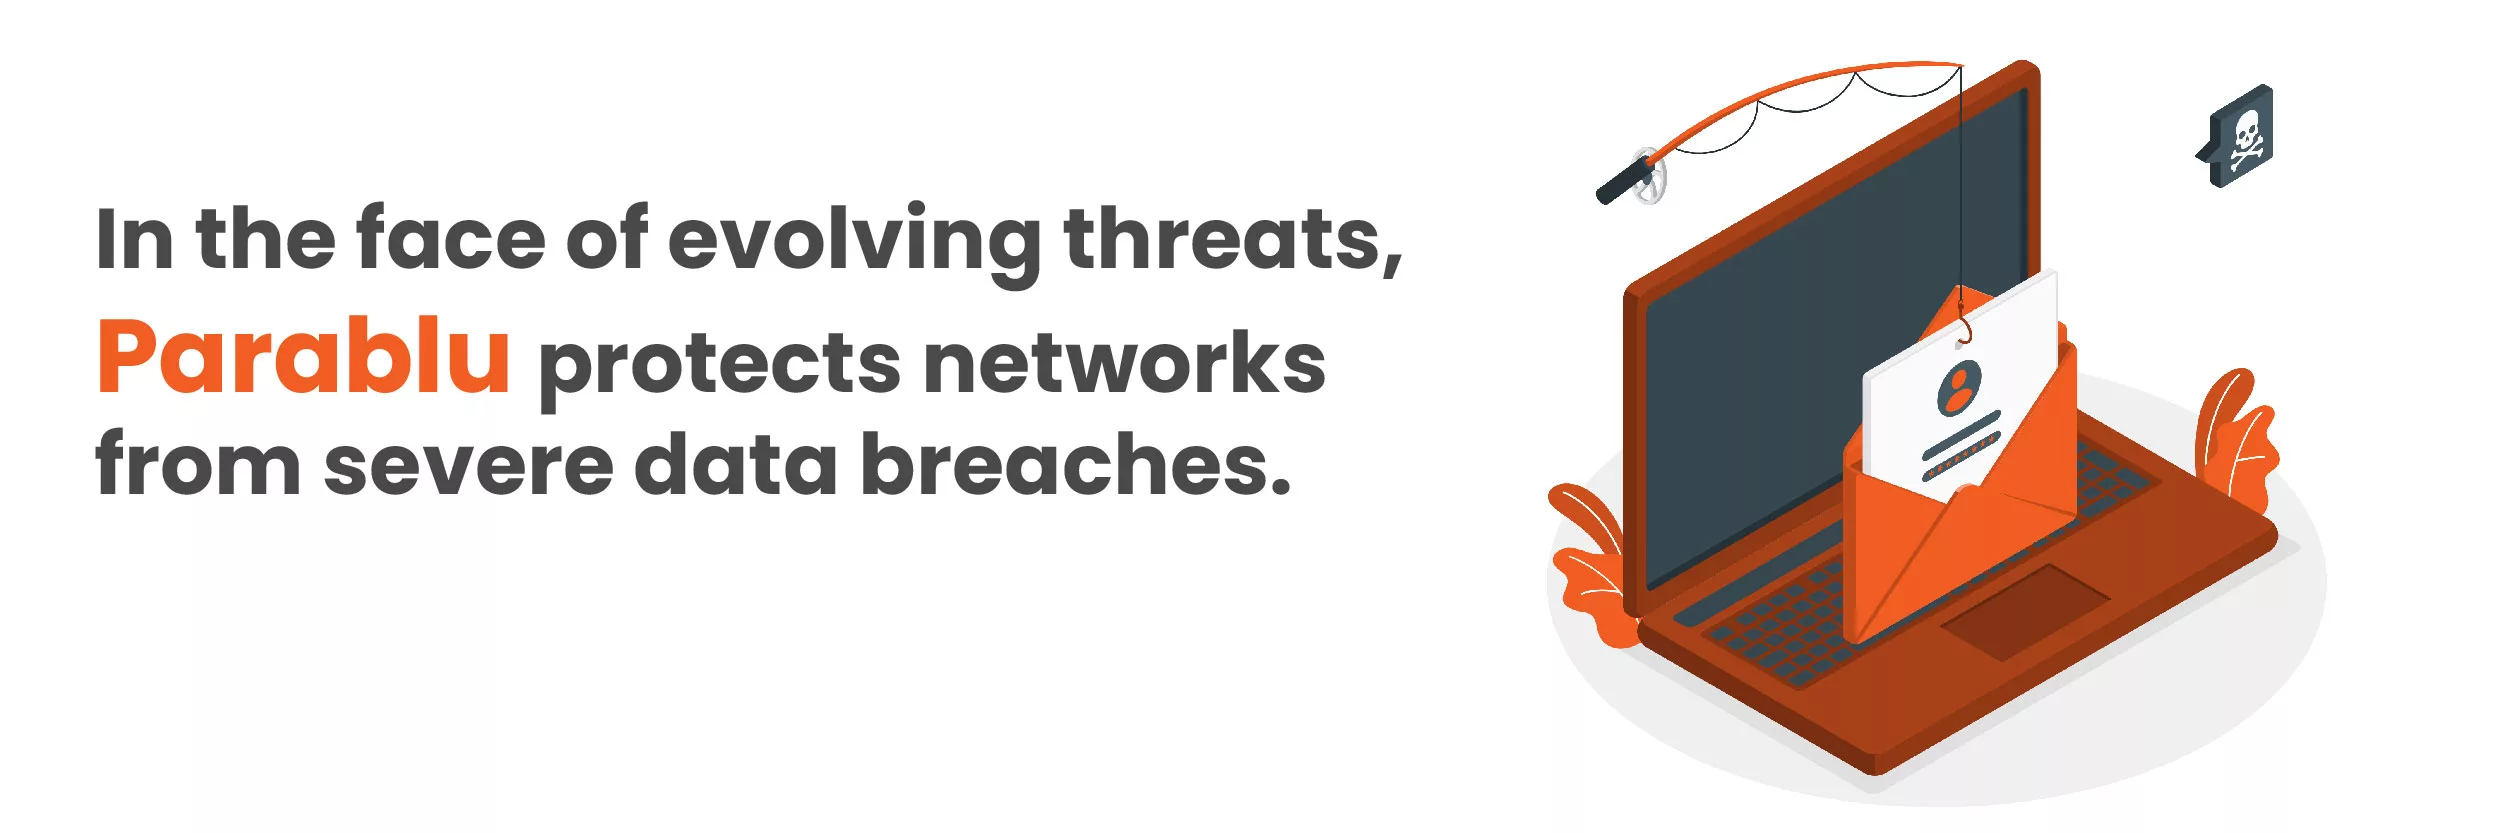 Parablu protects server data against breaches.